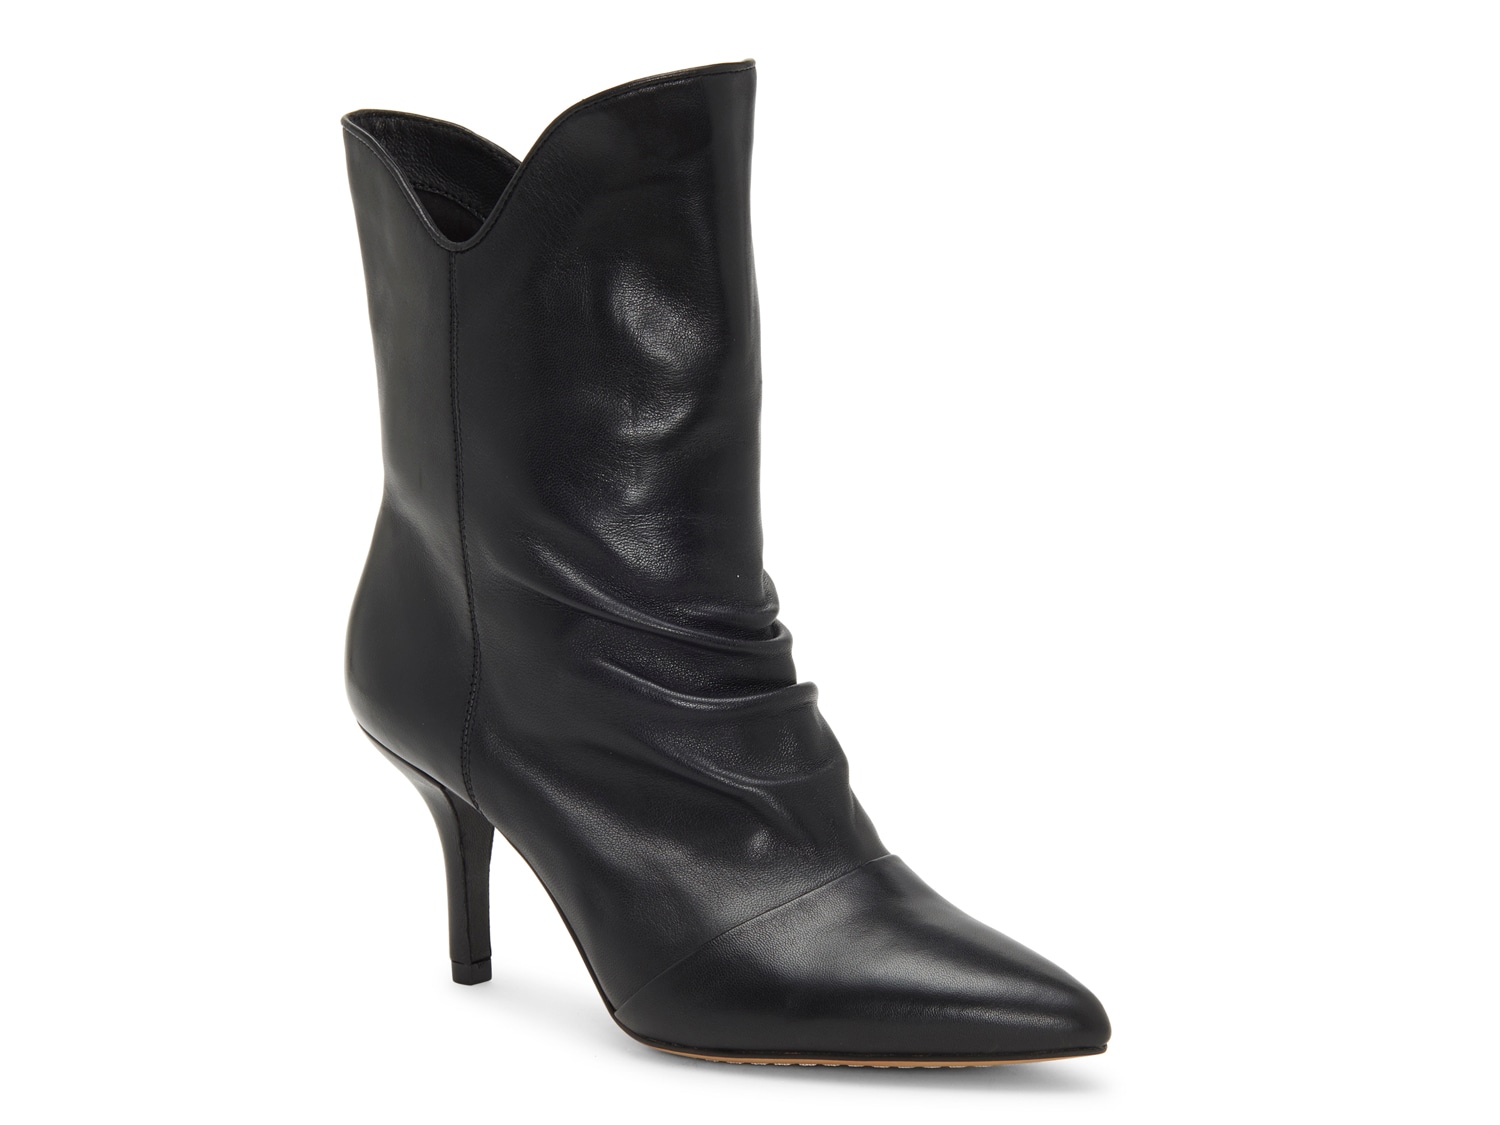 Vince Camuto Andrissa Bootie - Free Shipping | DSW